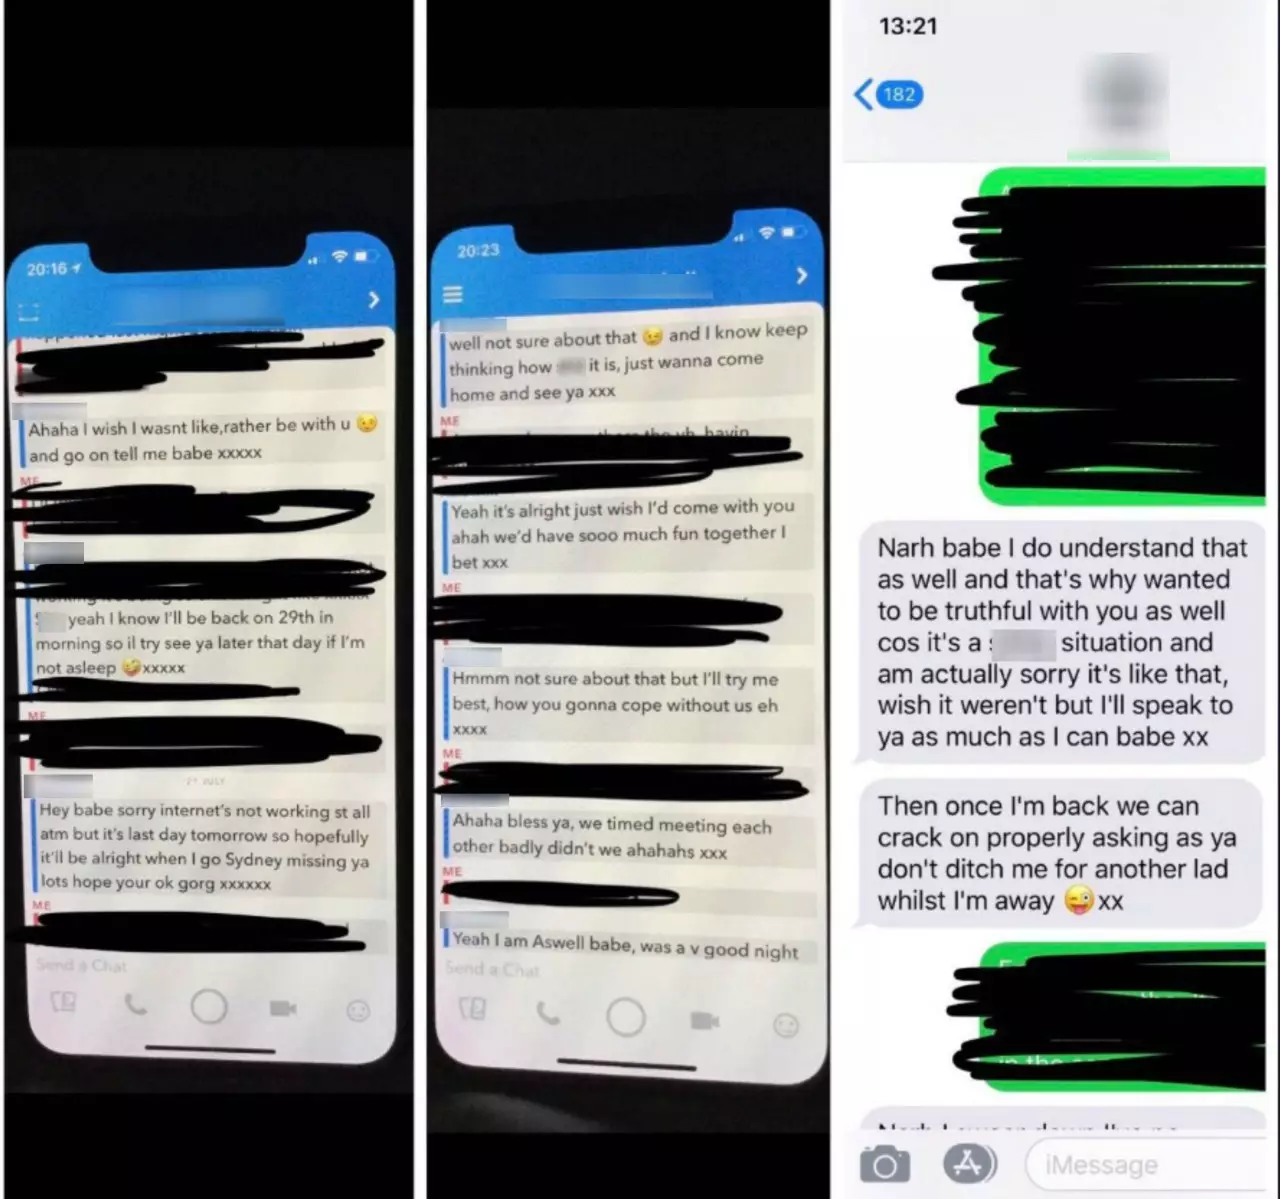 The messages were being sent while Emily was on holiday with her now ex-boyfriend.